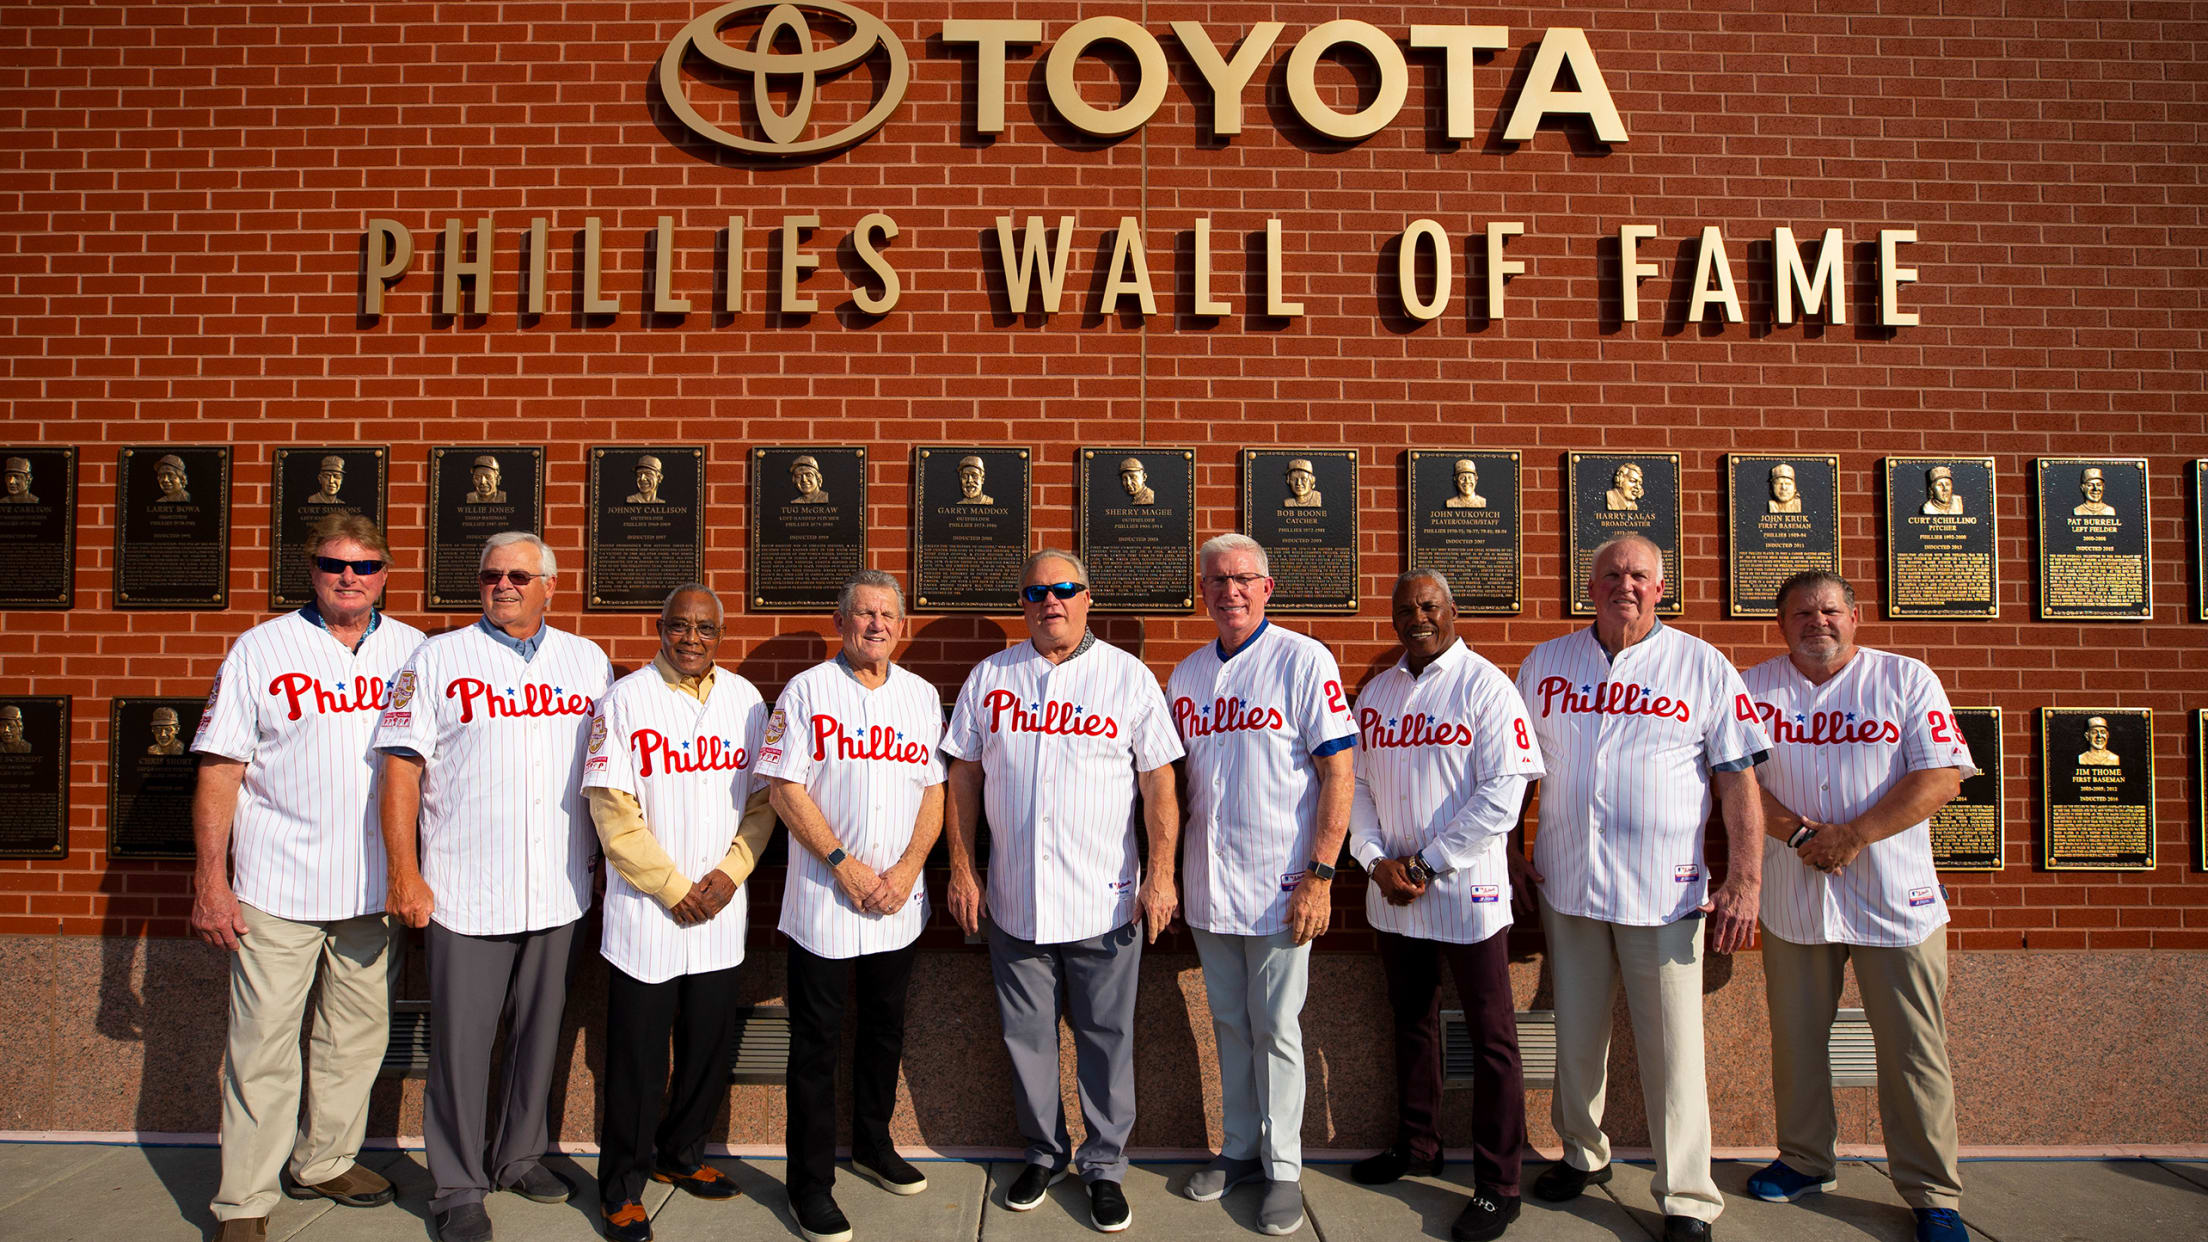 Burrell inducted into Phillies' Wall of Fame